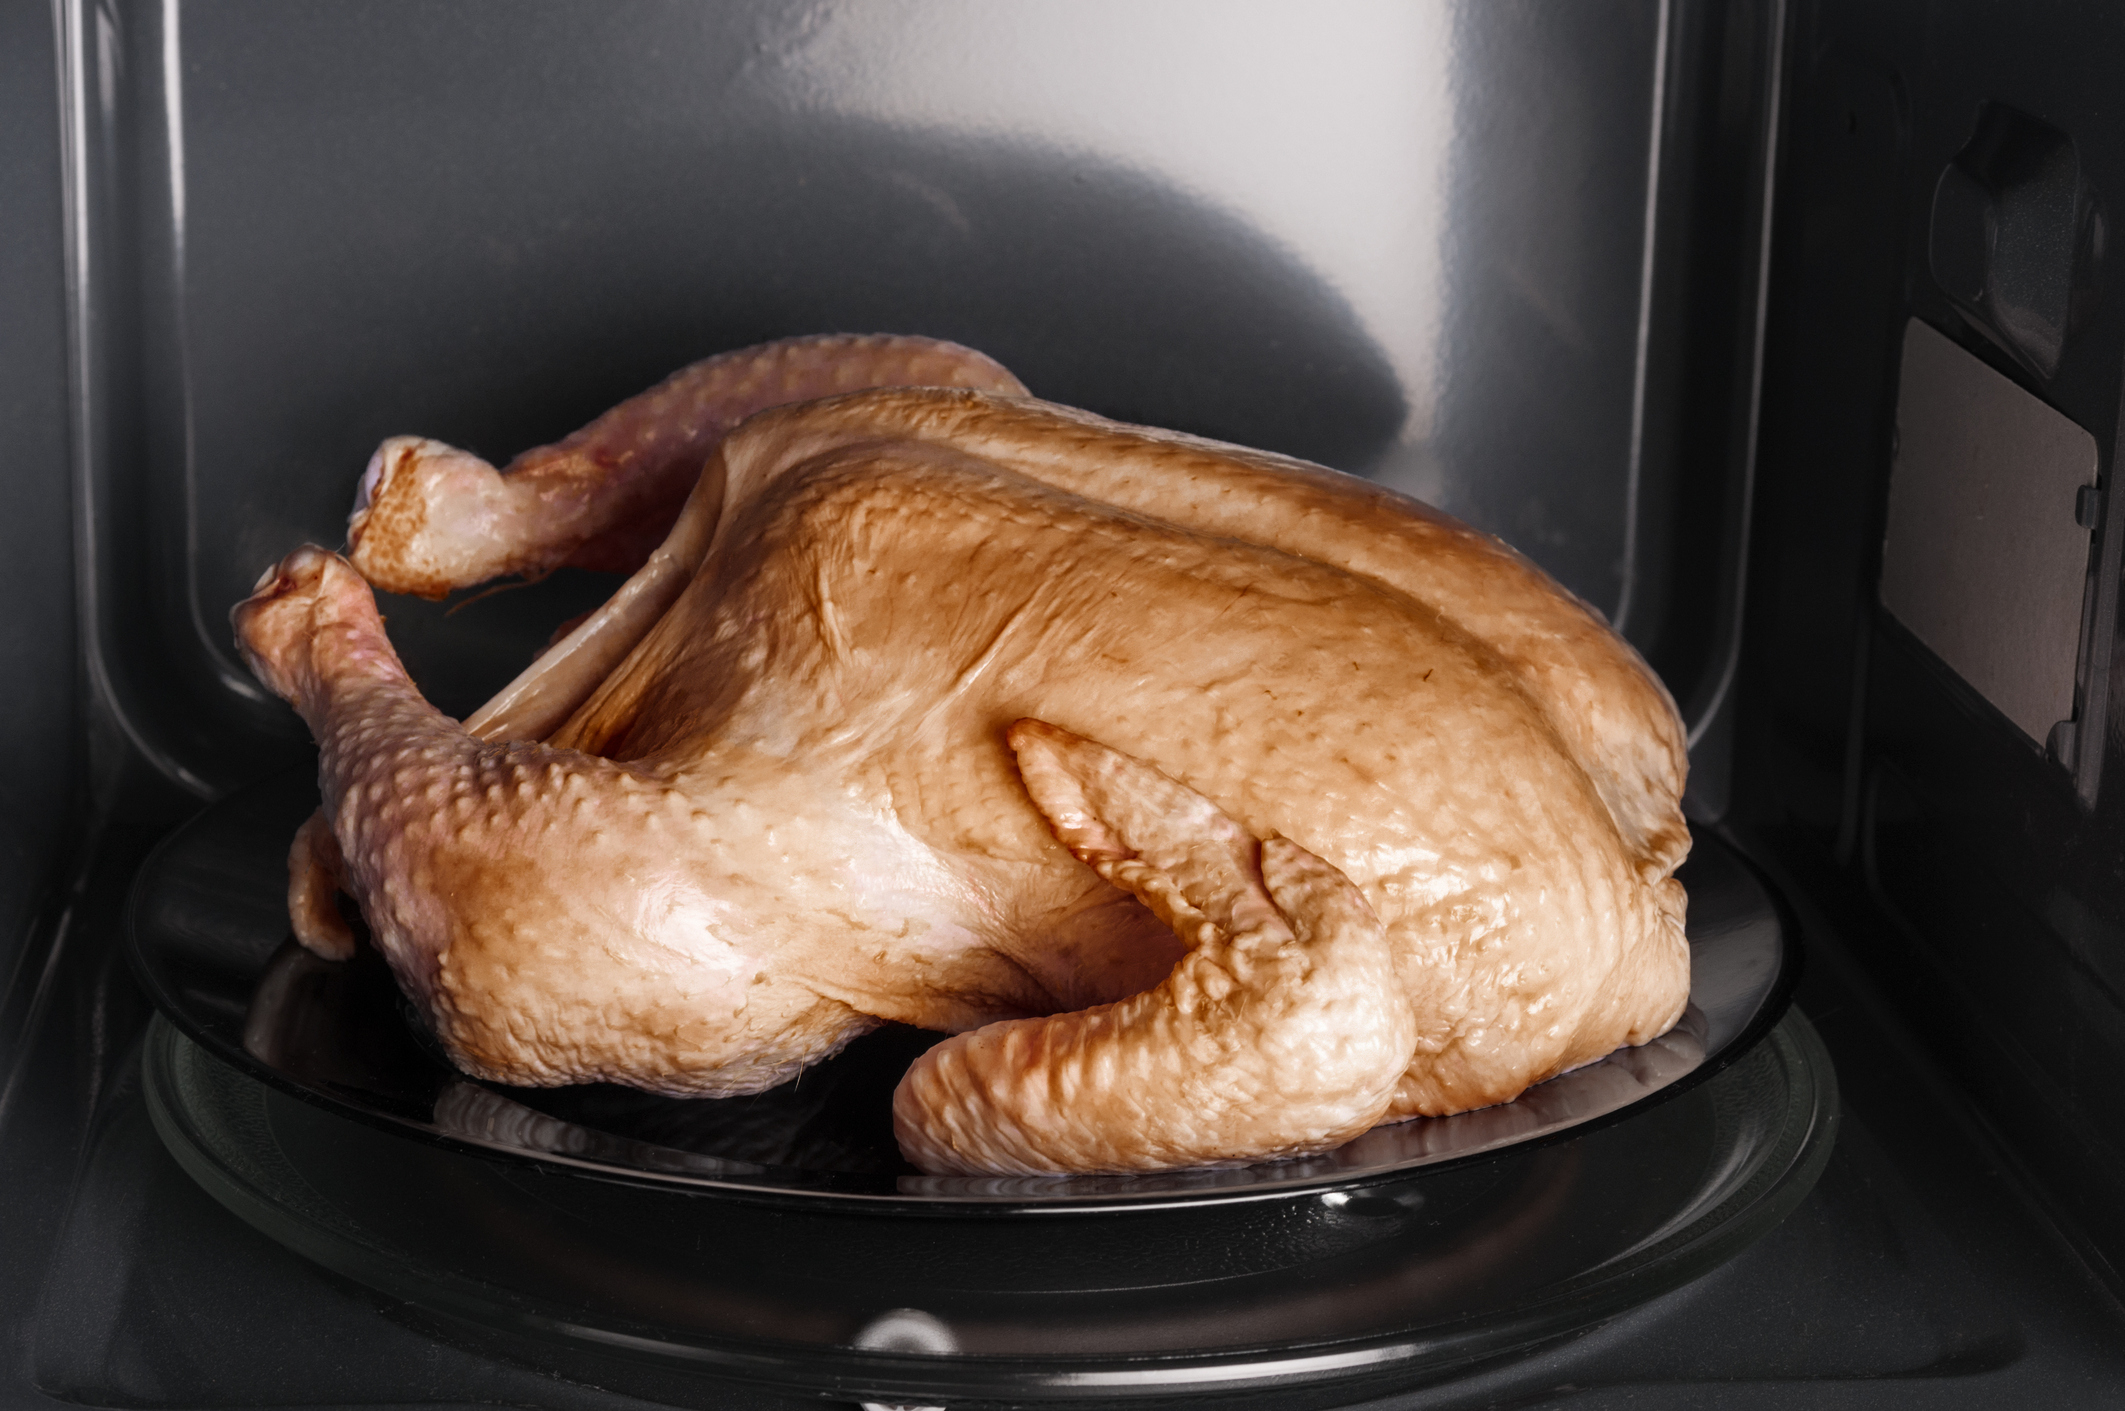 A whole chicken in a microwave